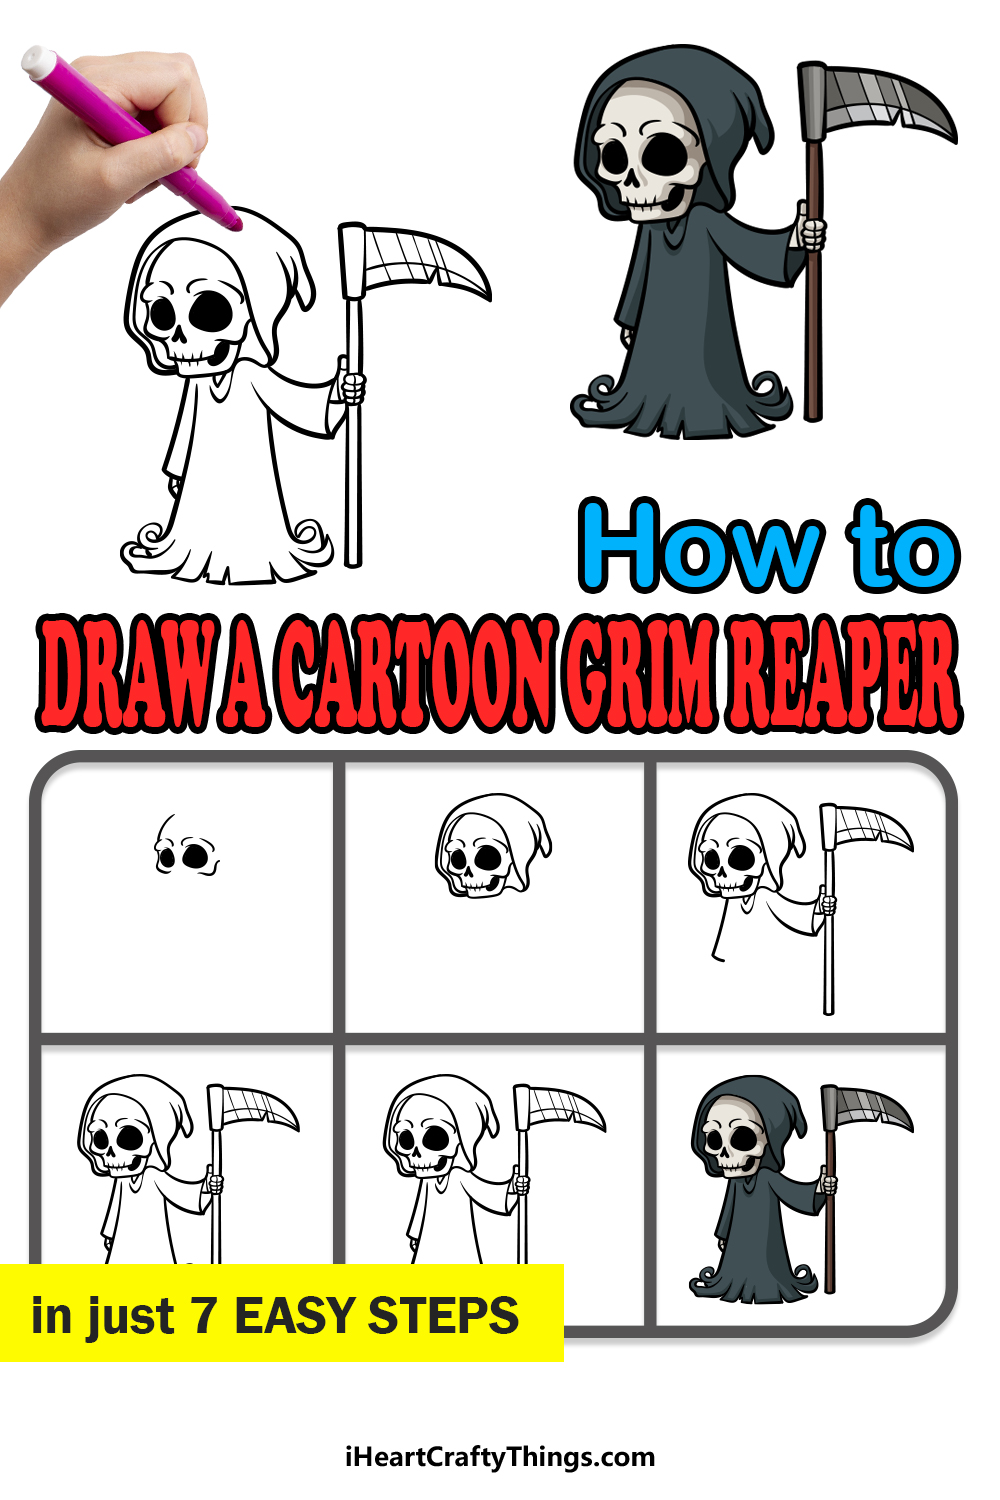 how to draw a cartoon Grim Reaper in 7 easy steps